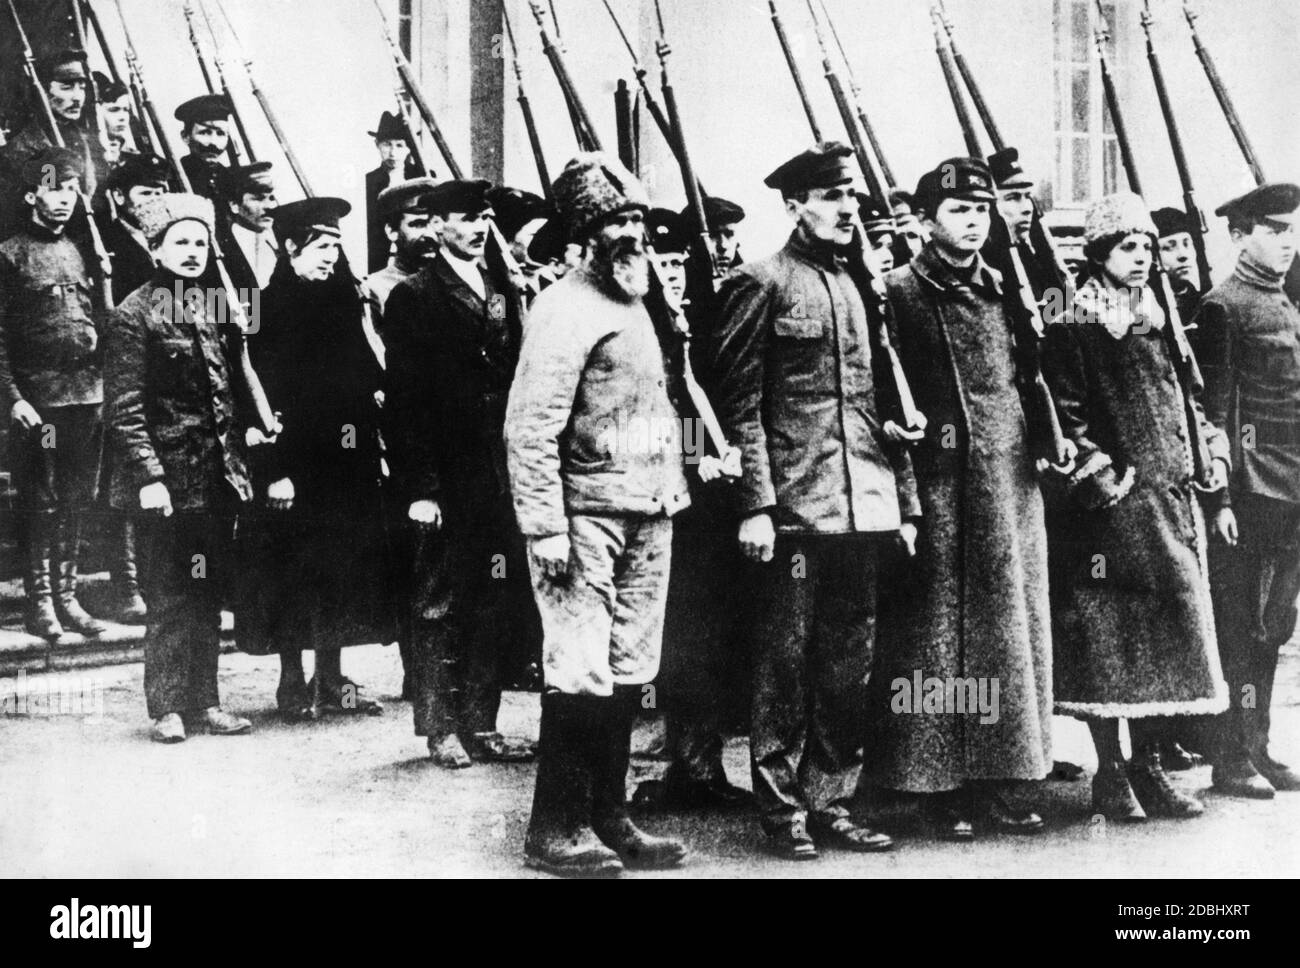 The Red Army under Trotsky managed to stand up to the Belarusian armies and foreign interventions, although it consisted mainly of volunteers. Many peasants, workers and women joined the Red Army. Here is a photo of volunteers during their training. Stock Photo